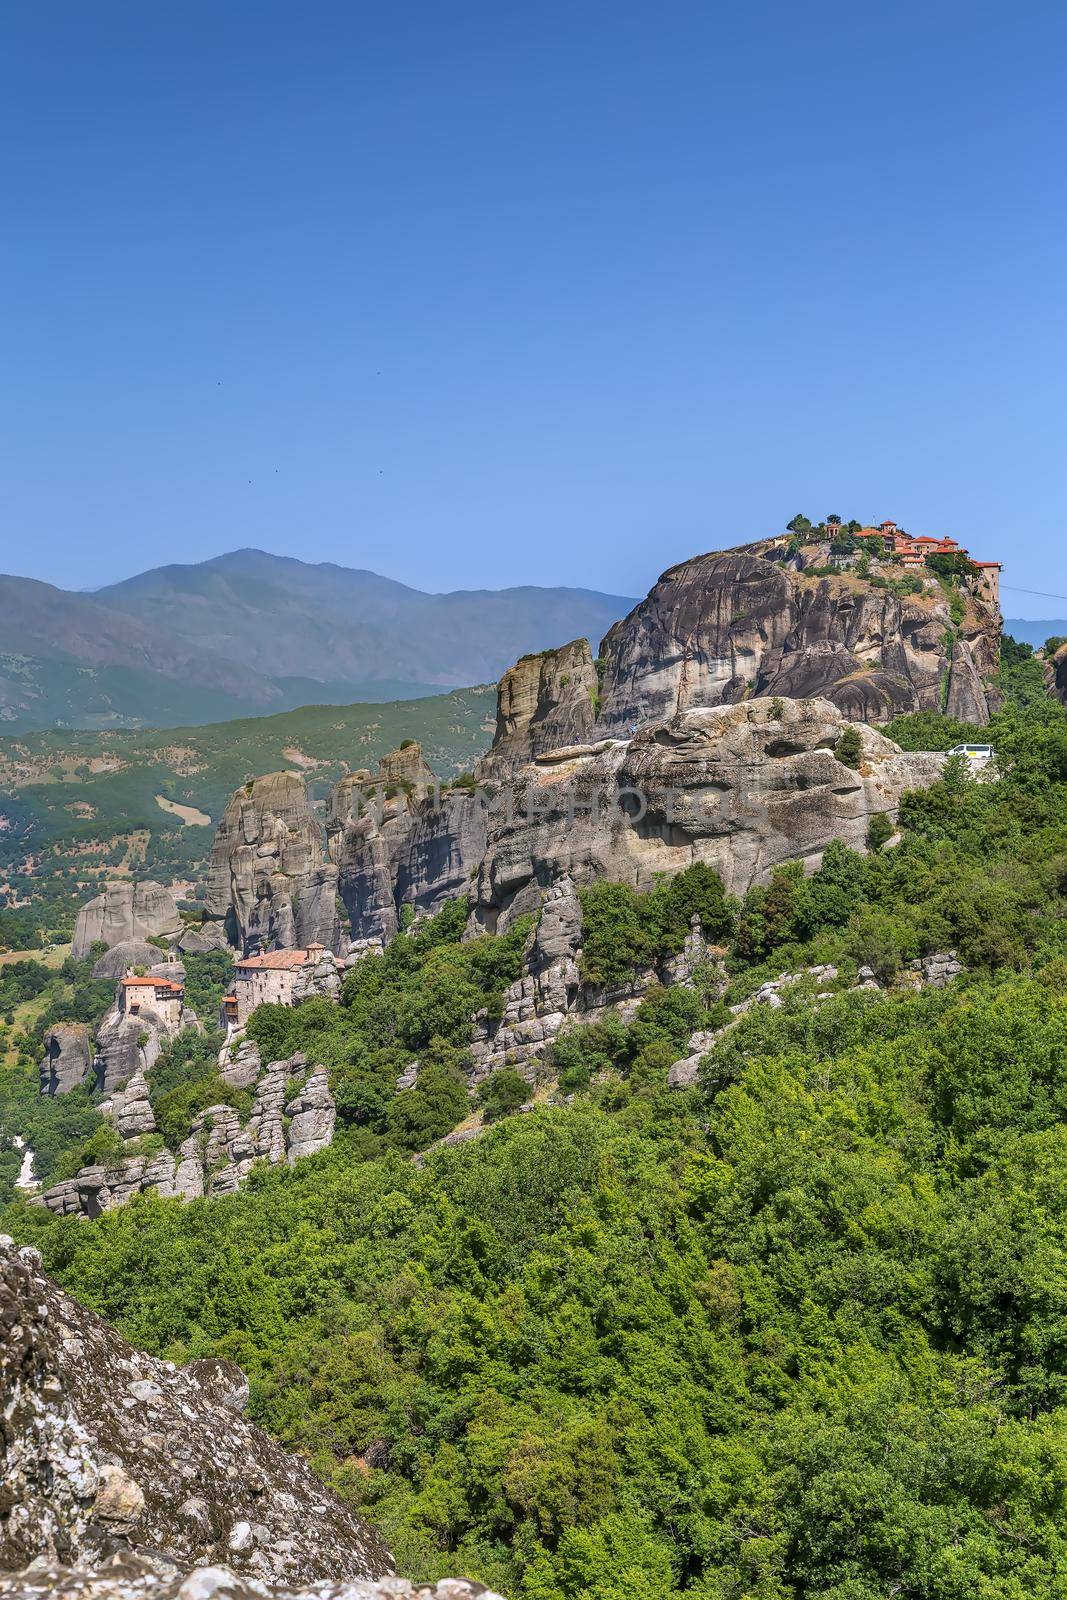 View of rocls and monastery in Meteora, Greece